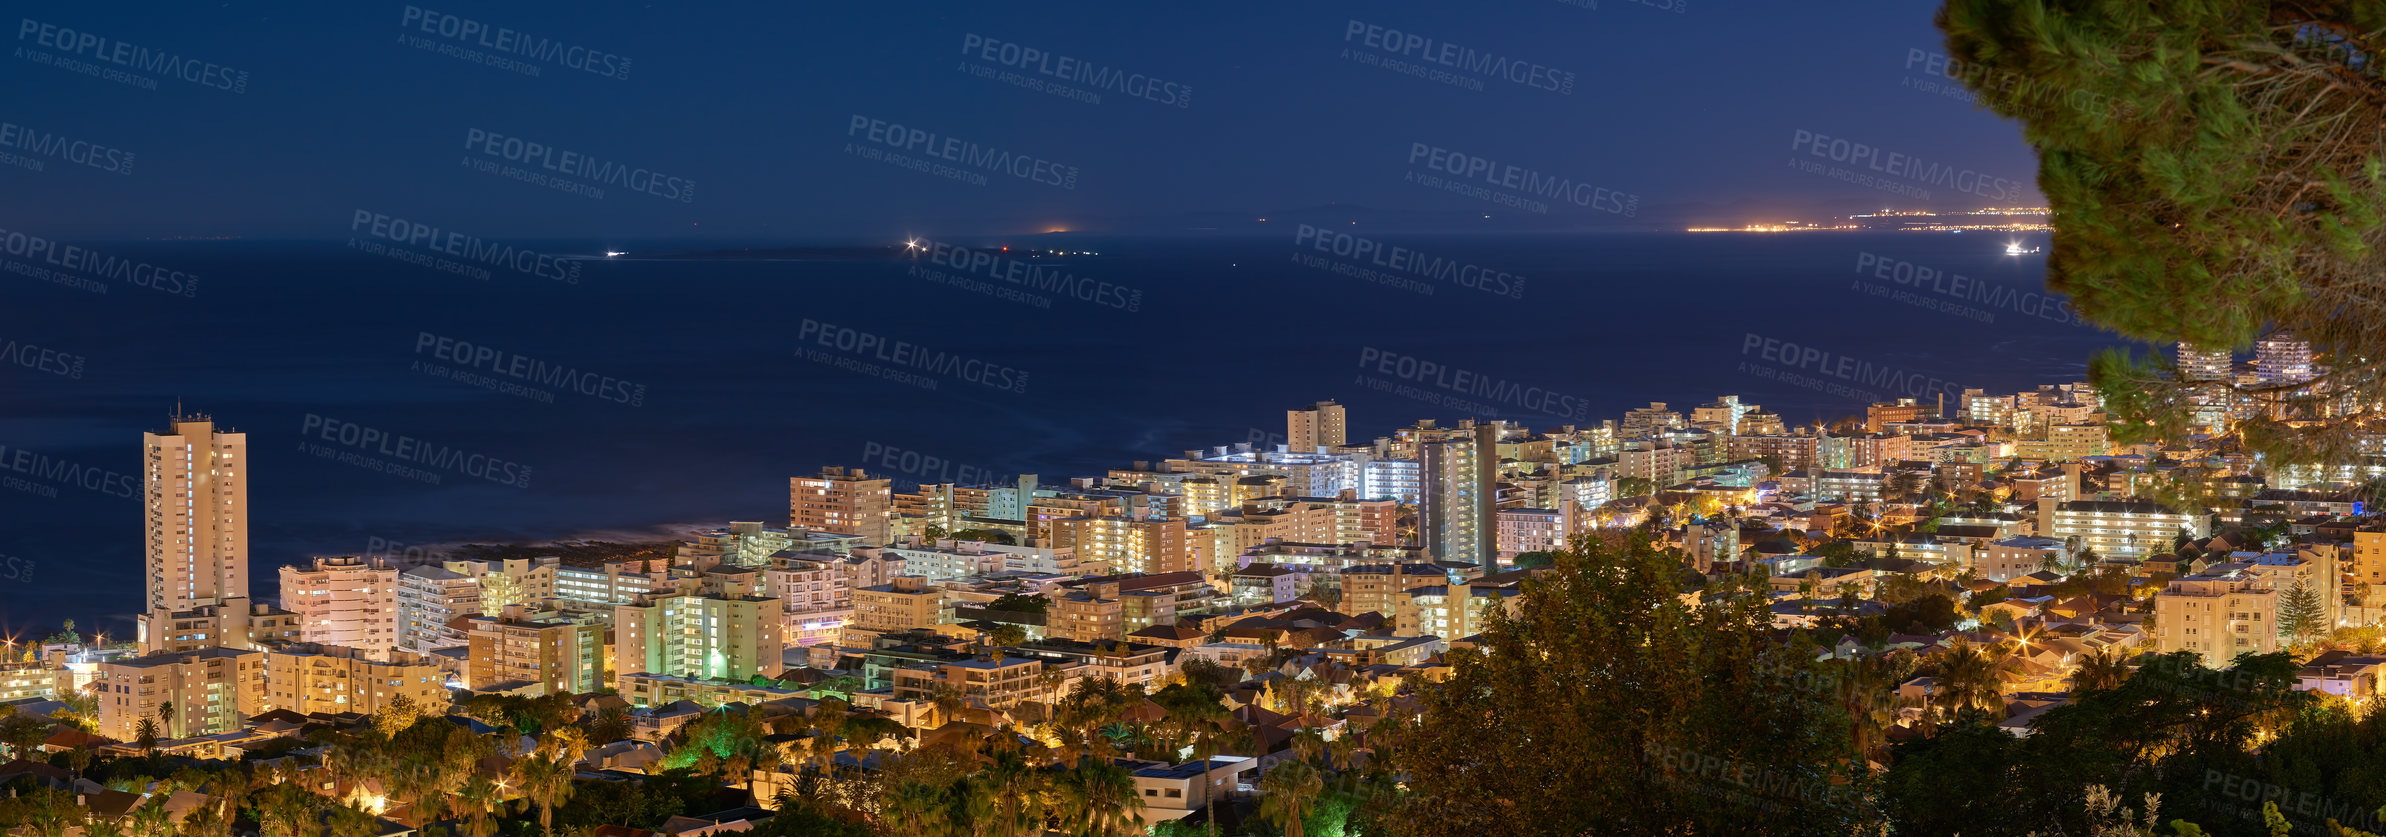 Buy stock photo Copy space with dark night sky over the view of a coastal city seen from Signal Hill in Cape Town, South Africa. Calm and scenic panoramic landscape of lights illuminating an urban skyline by the sea